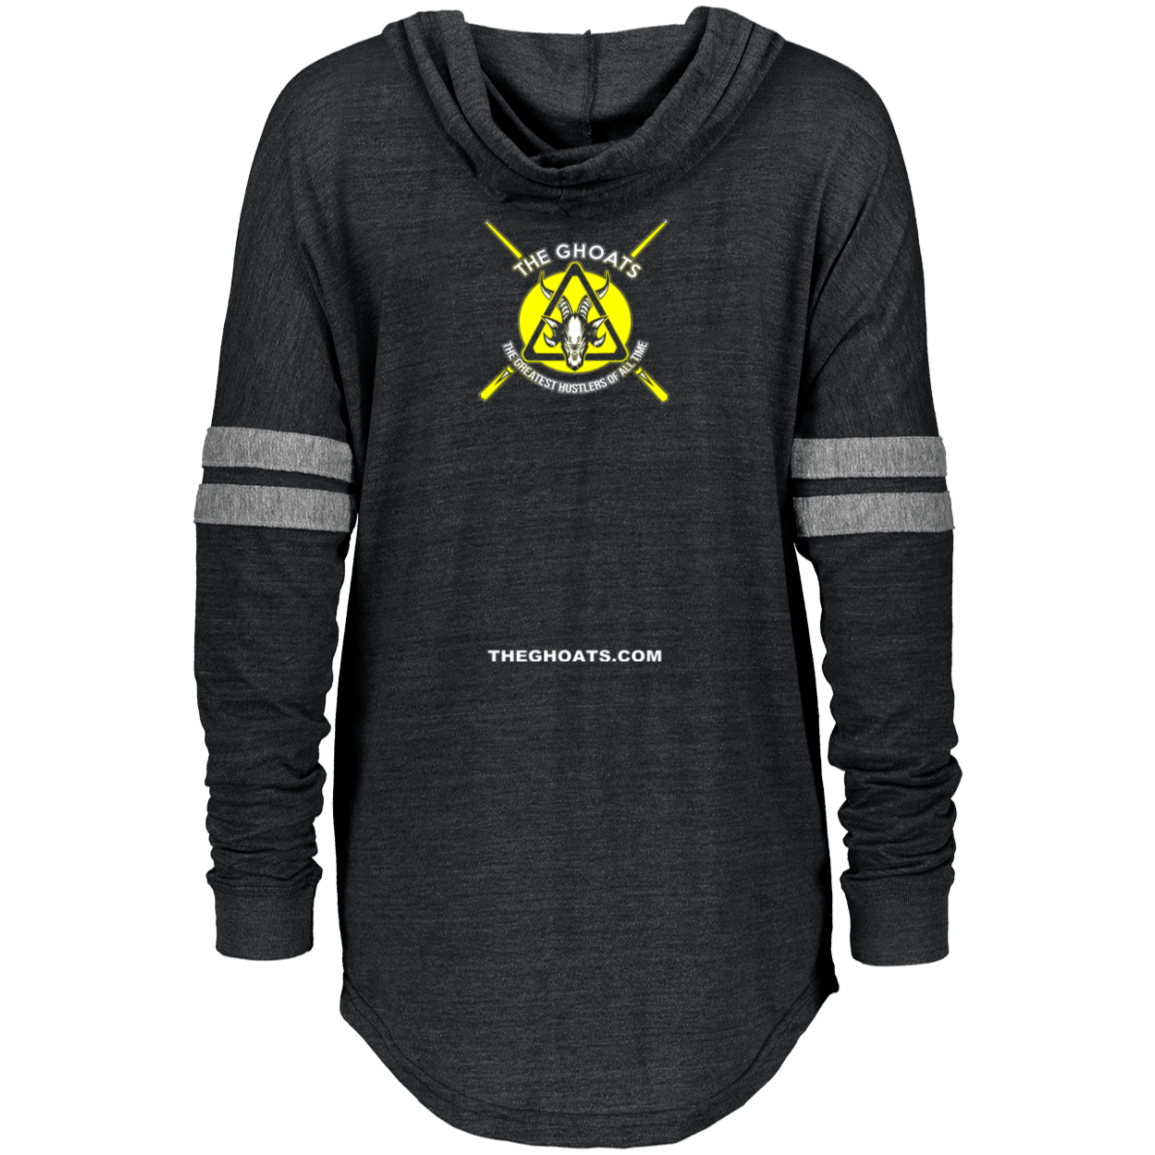 The GHOATS Custom Design #1. Active Shooter. Ladies Hooded Low Key Pullover